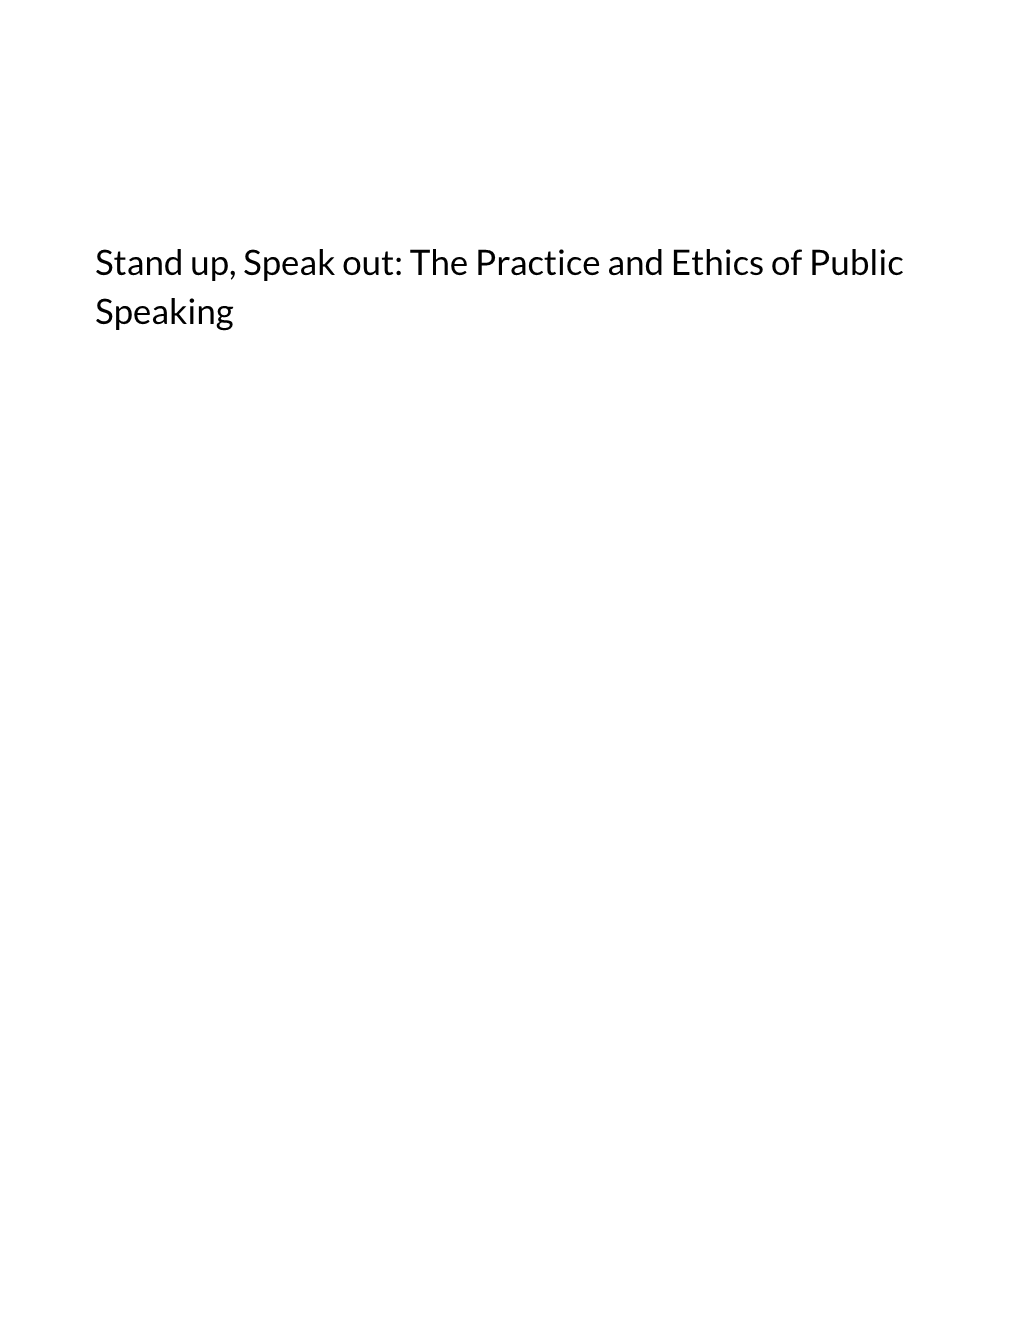 The Practice and Ethics of Public Speaking Stand Up, Speak Out: the Practice and Ethics of Public Speaking